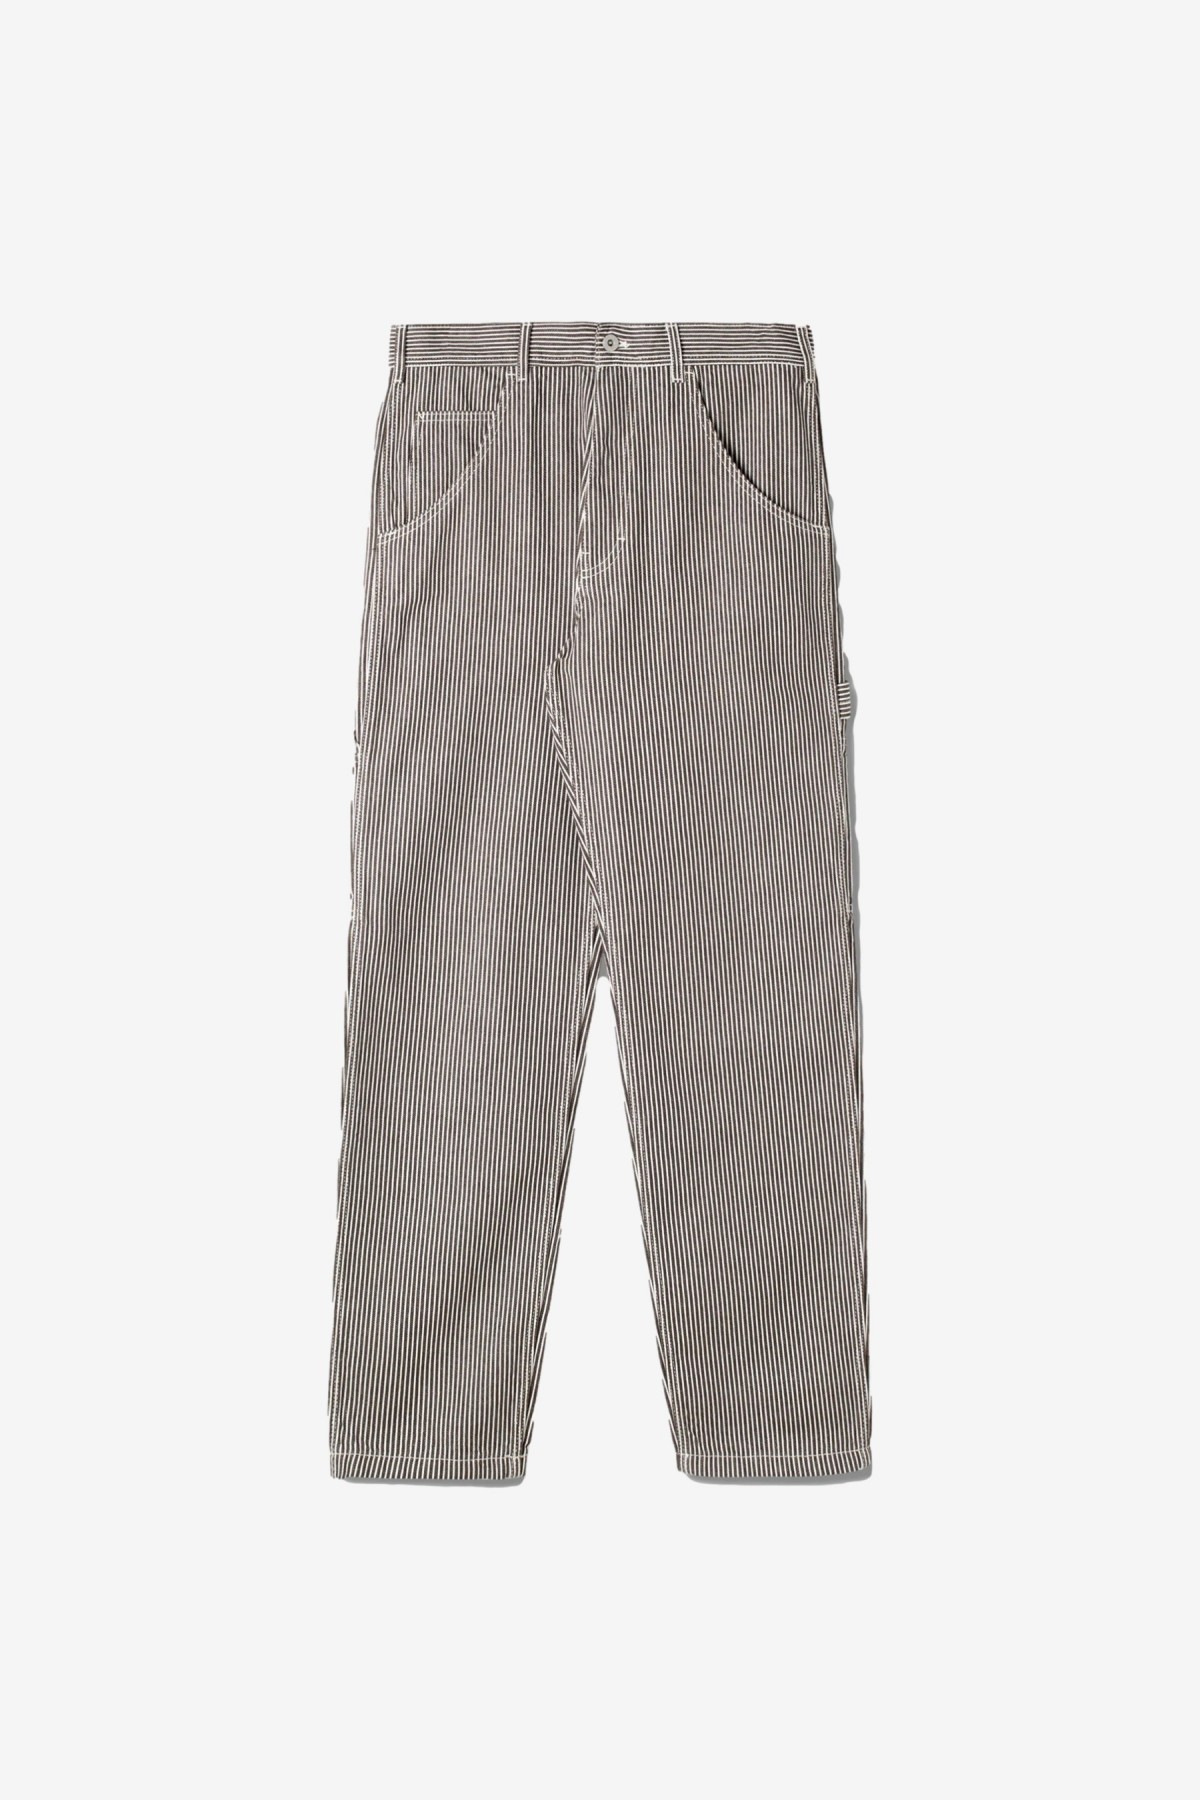 Stan Ray 80S Painter Pant in Black / Natural Hickory